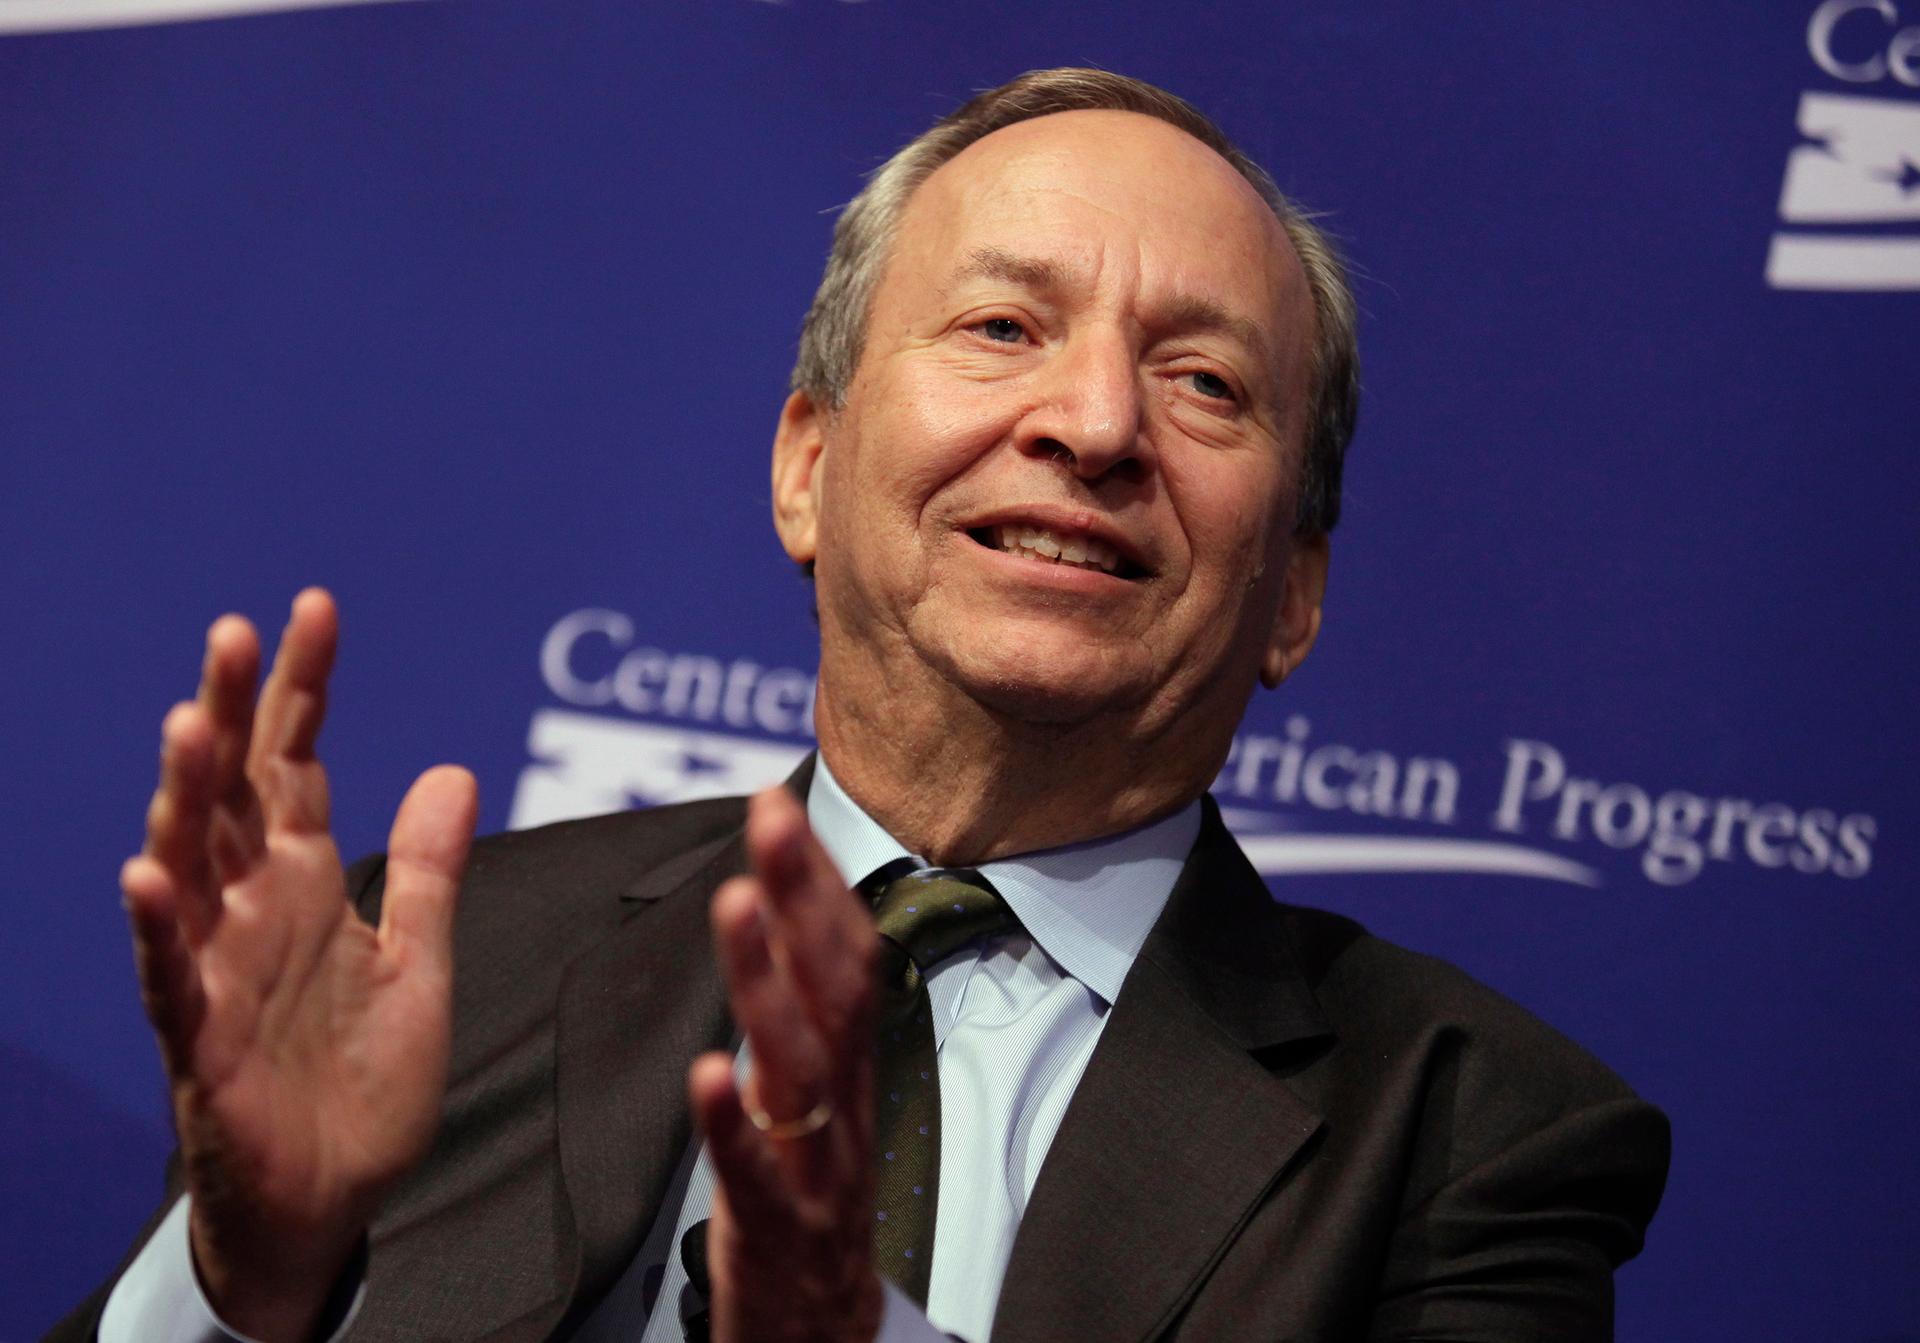 Lawrence Summers, former US treasury secretary and Harvard president, ignited a firestorm on gender issues a decade ago this month.